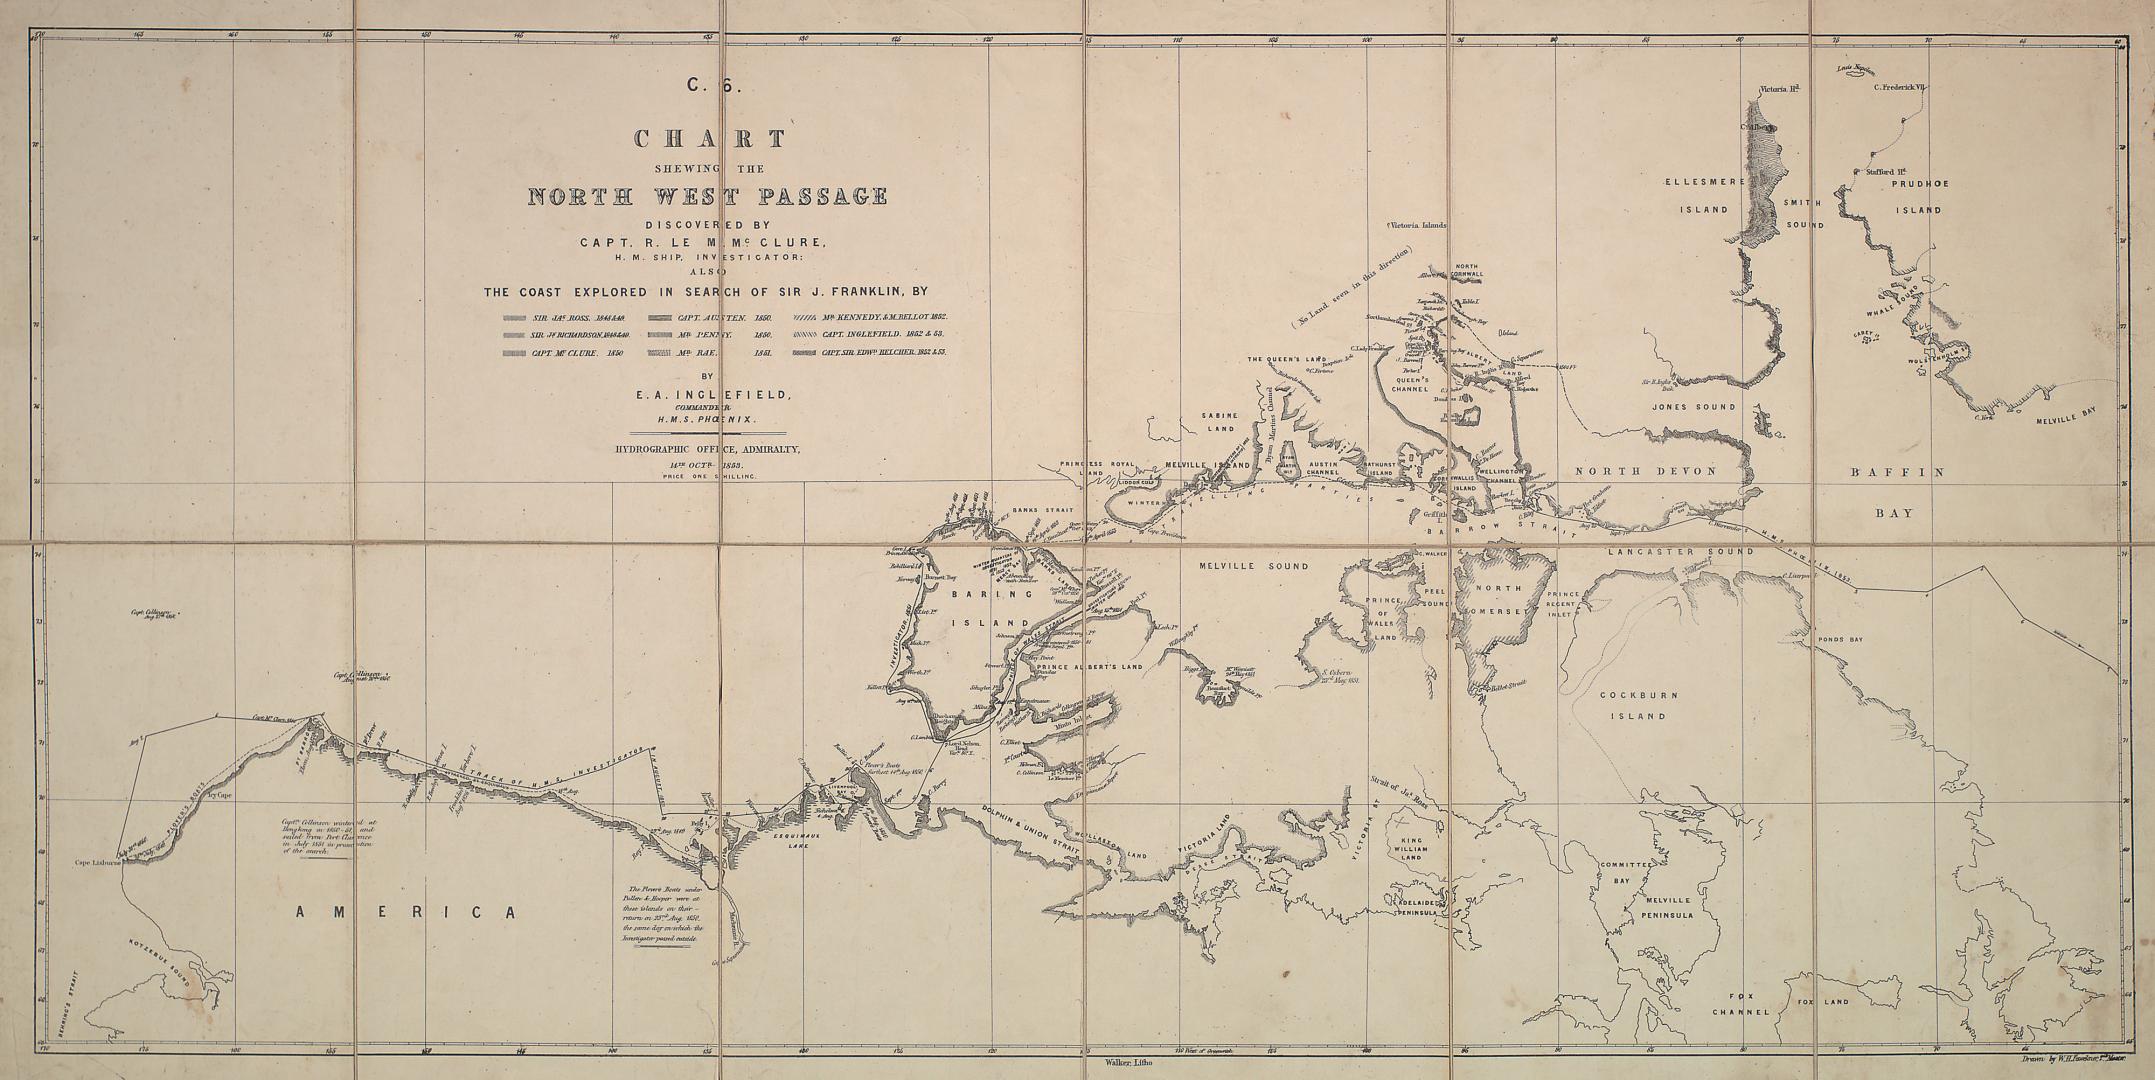 C. 6. Chart shewing the North West Passage discovered by Capt. R. LeM. McClure H.M. Ship Investigator also the coast explored in Search of Sir John Franklin